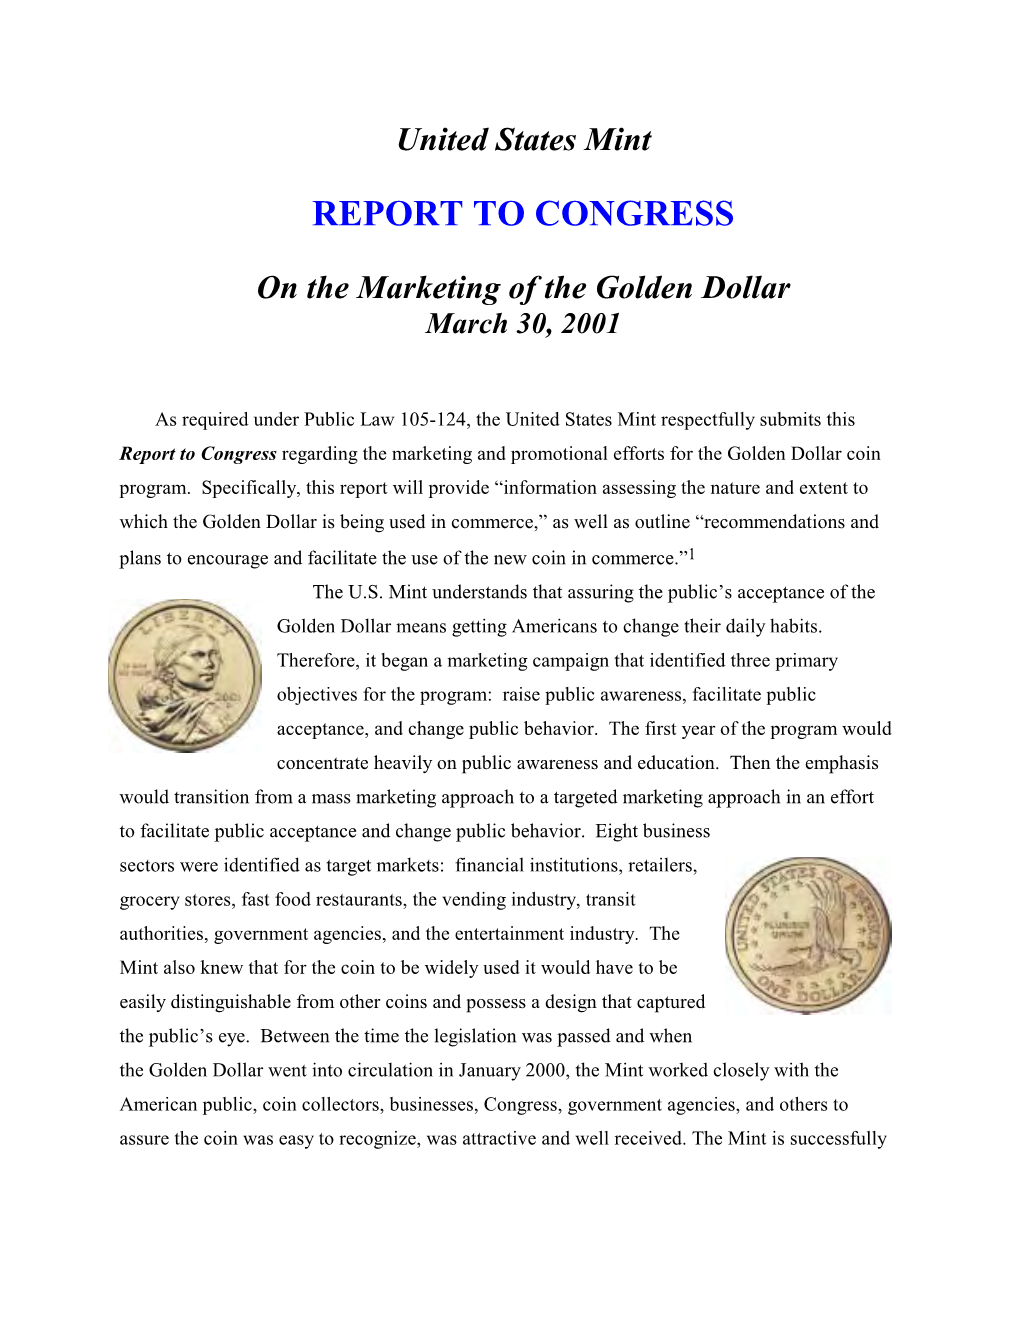 United States Mint REPORT to CONGRESS: on the Marketing Of